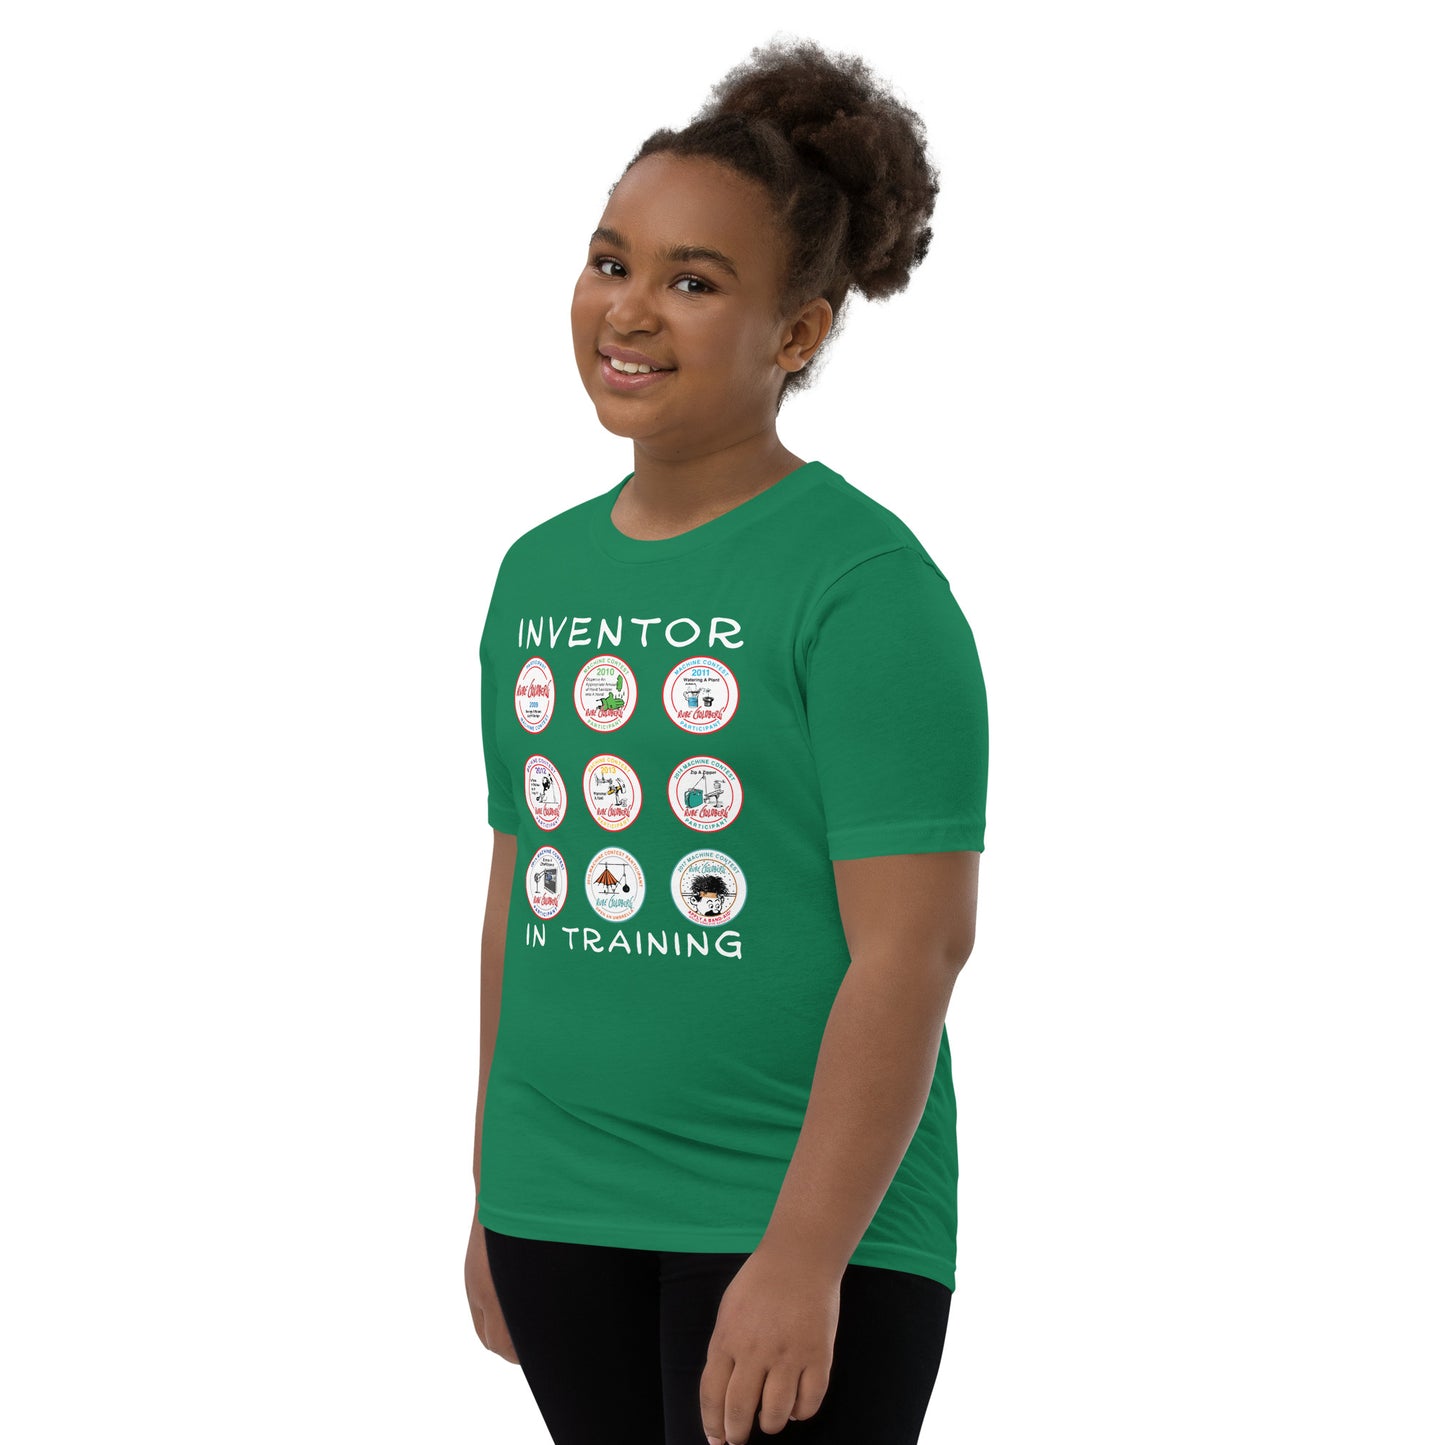 Inventor in Training Youth Tee